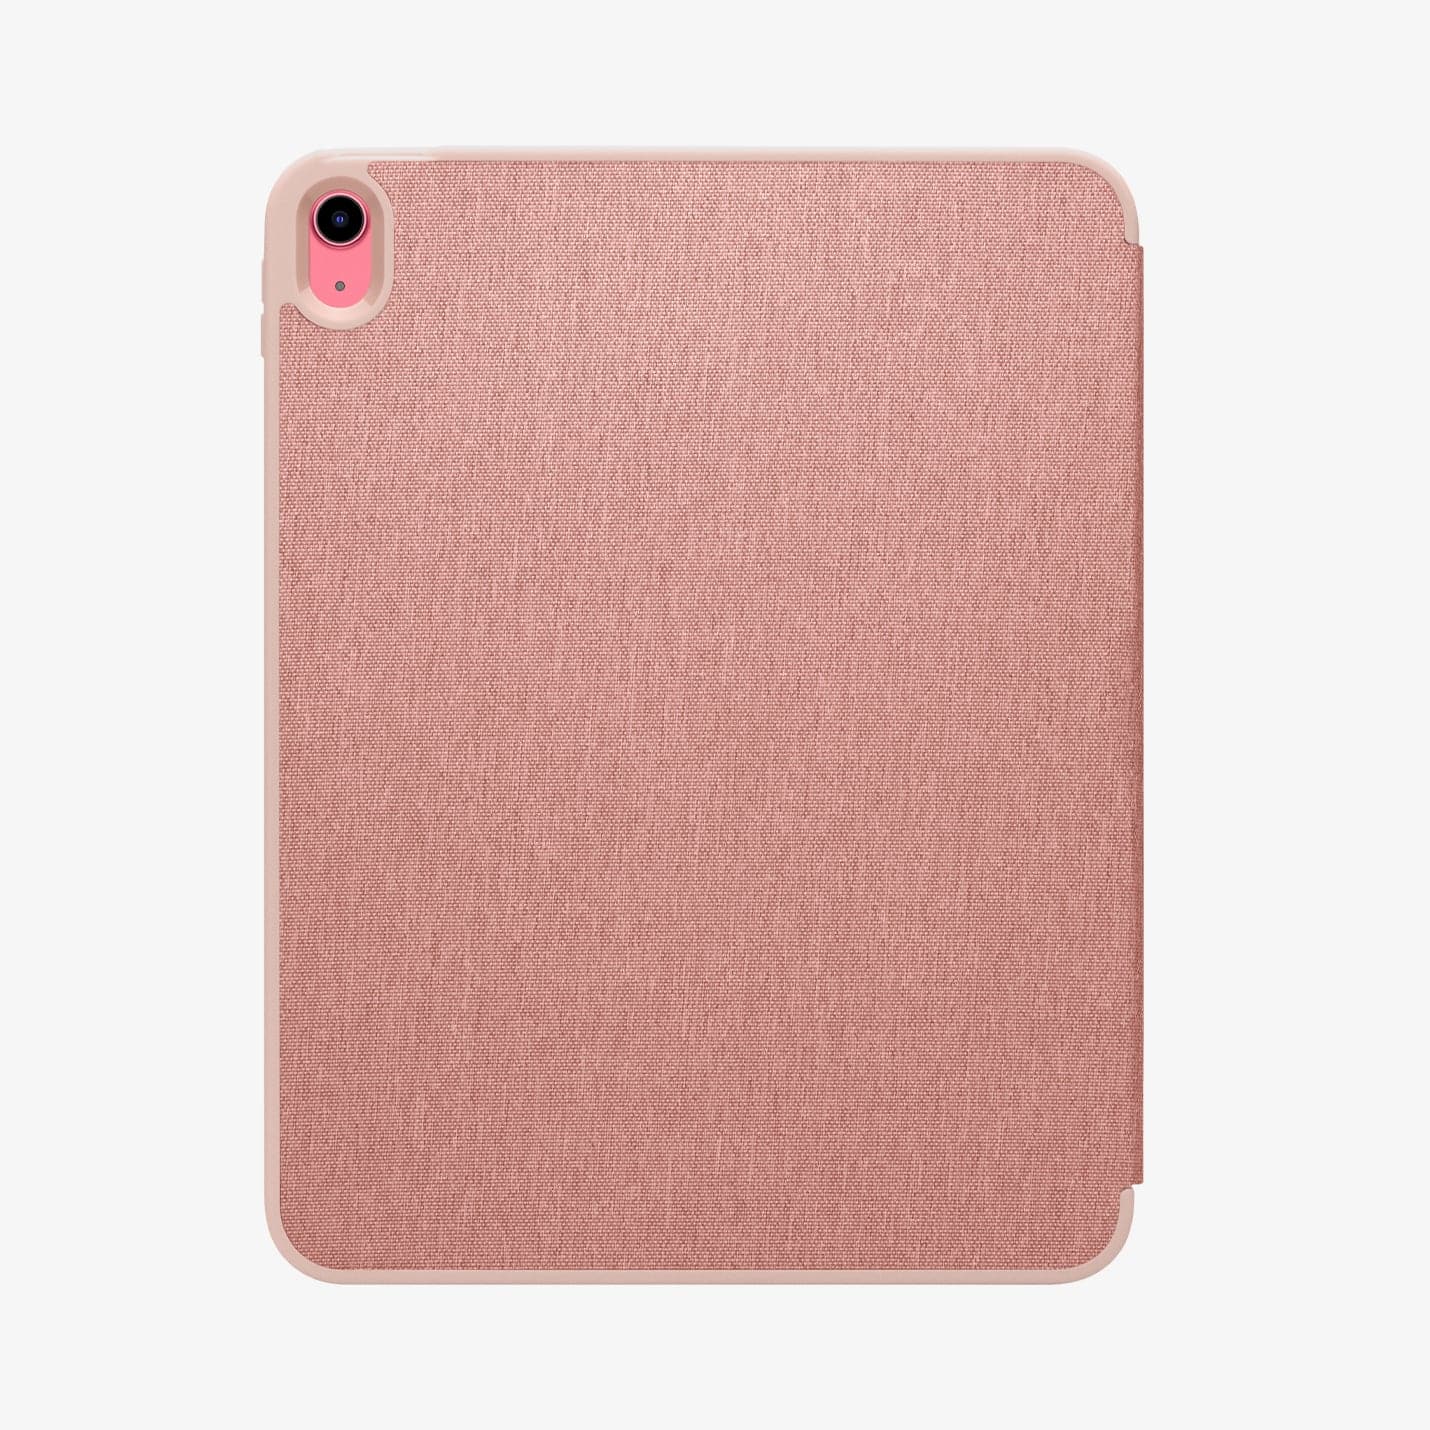 ACS05307 - iPad 10.9" Case Urban Fit in rose gold showing the back